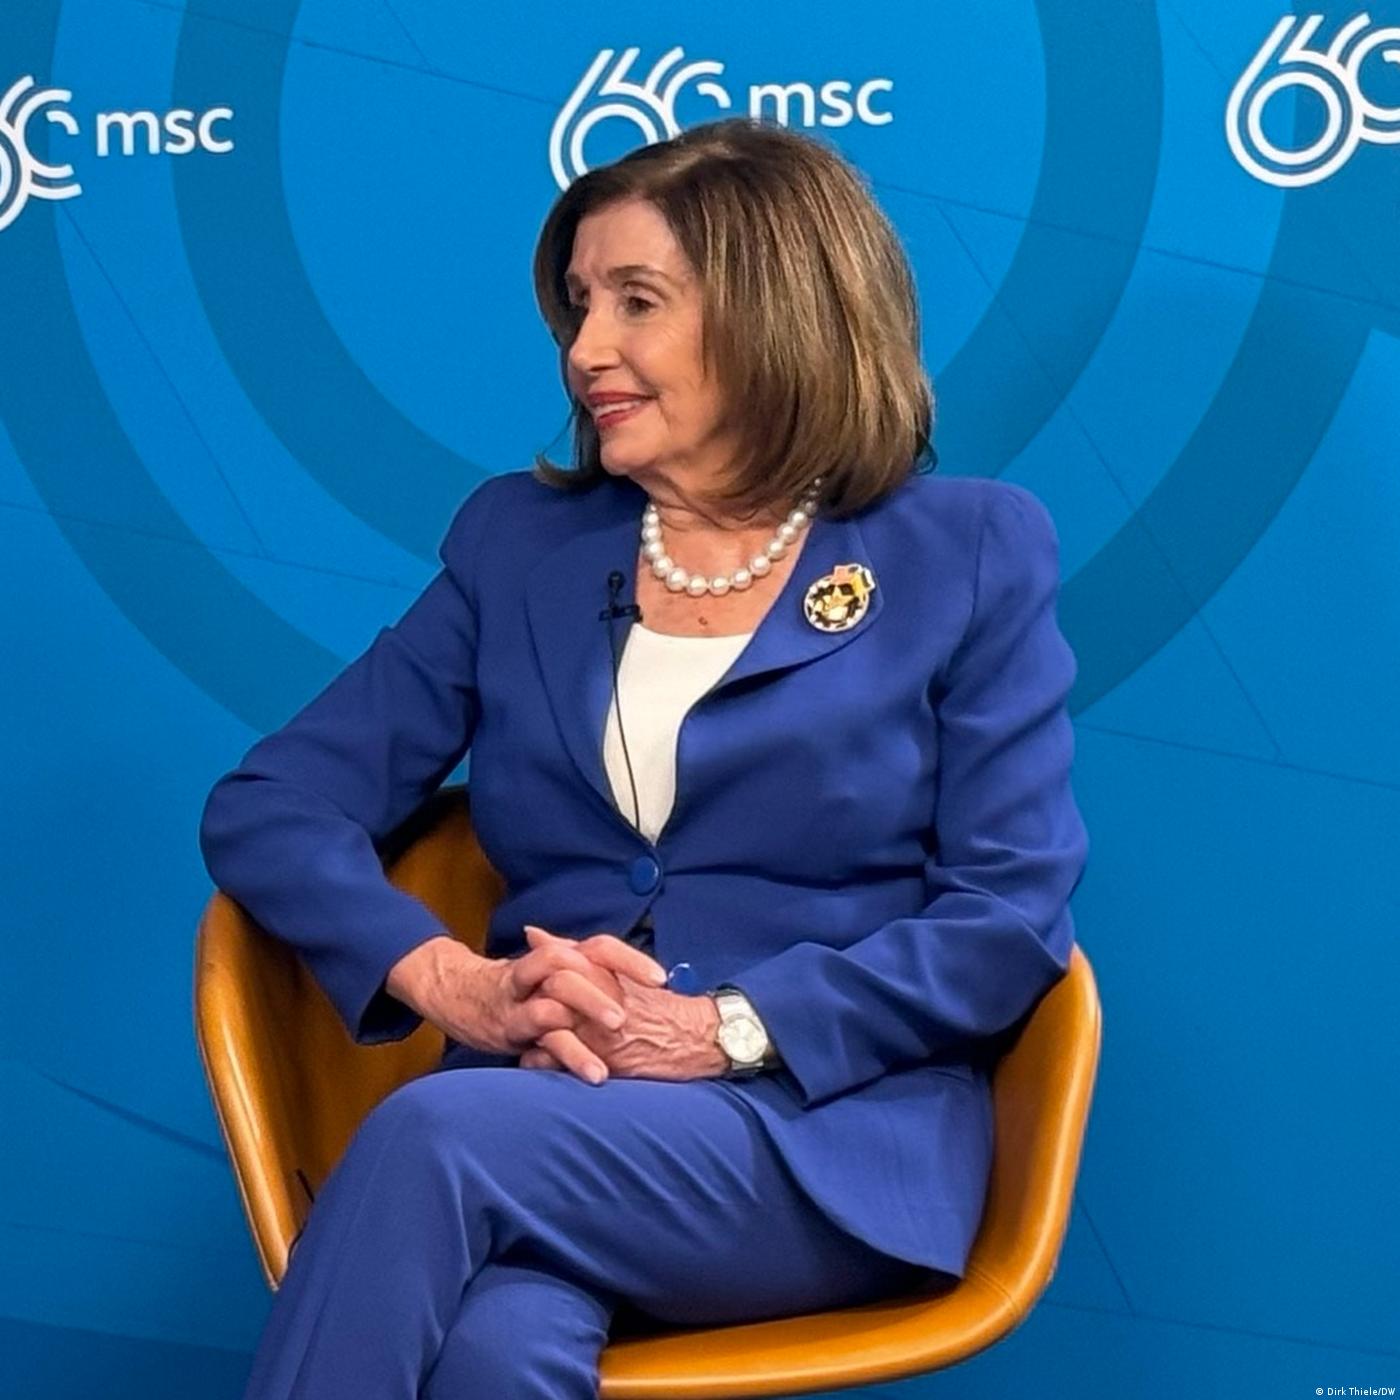 Conflict Zone Podcast with Nancy Pelosi: 'The behavior of Netanyahu is inexcusable'